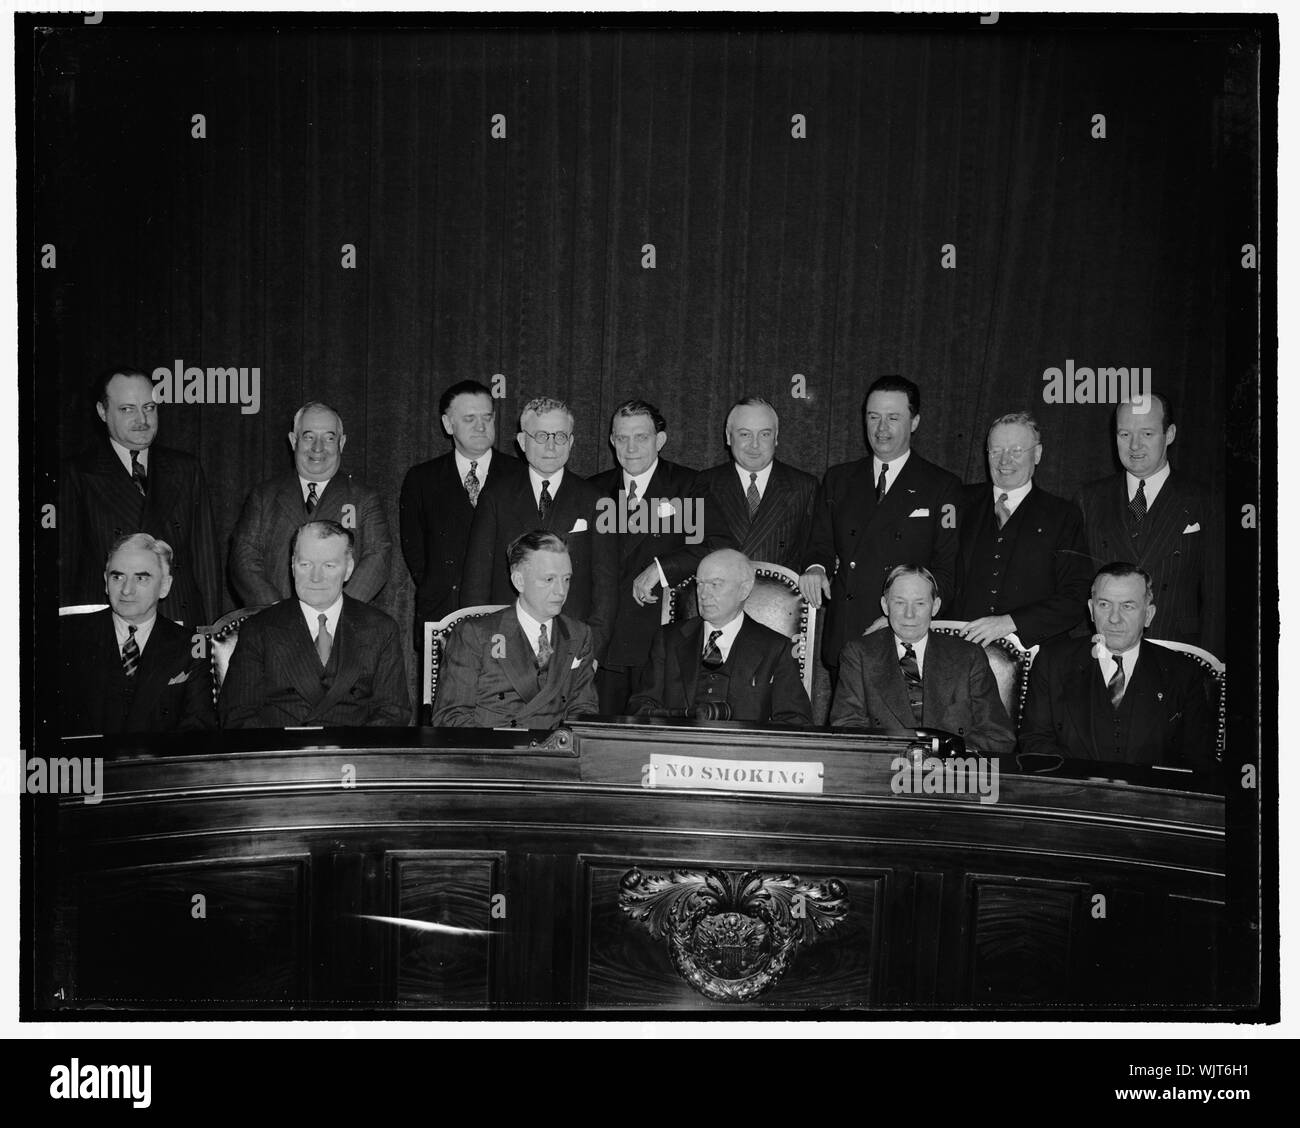 House Committee considers impeachment of Labor Secretary. Washington, D.C., Jan. 25. The House Judiciary Committee today considered charges contained in an impeachment resolution presented yesterday by Rep. J Parnell Thomas, but postponed action until tomorrow. Members shown here are: Front row; Wallace E. Pierce, Charles F. McLaughlin, Francis E. Walter, Hatton Sumners, chairman of the Committee, Zebulon Weaver, Raymond S. Springer; Back row; B.J. Monkiewicz, Louis E. Graham, John W. Gwynne, Earl Michener, U.S. Guyer, Abe Murdock, Dave (E)? Satterfield, Jr. William T. Byrne, James M. Barnes, Stock Photo